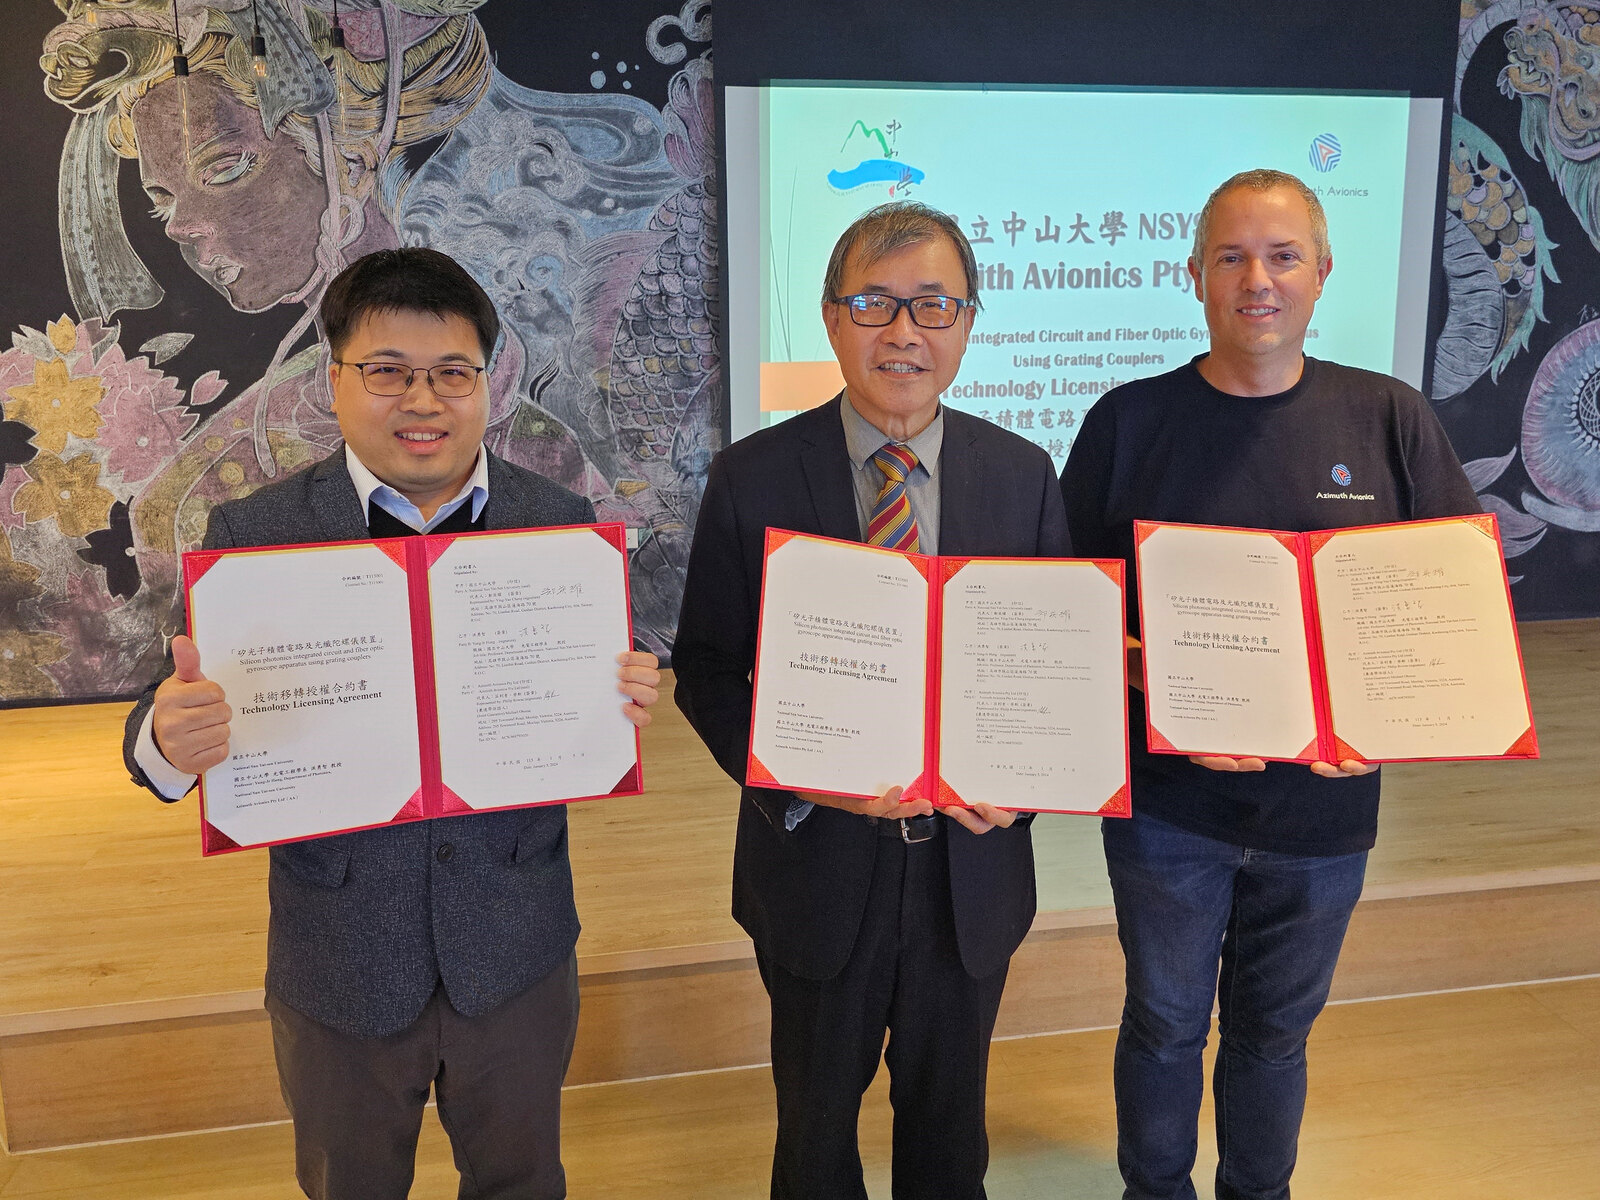 NSYSU research team signed an agreement with Australian Azimuth Avionics Pty Ltd to transfer technology. From the left of the photo, Professor Yung-Jr Hung of the Department of Photonics, President Ying-Yao Cheng of NSYSU, and Director of Australian Azimuth Avionics Pty Ltd Philip Rowse.